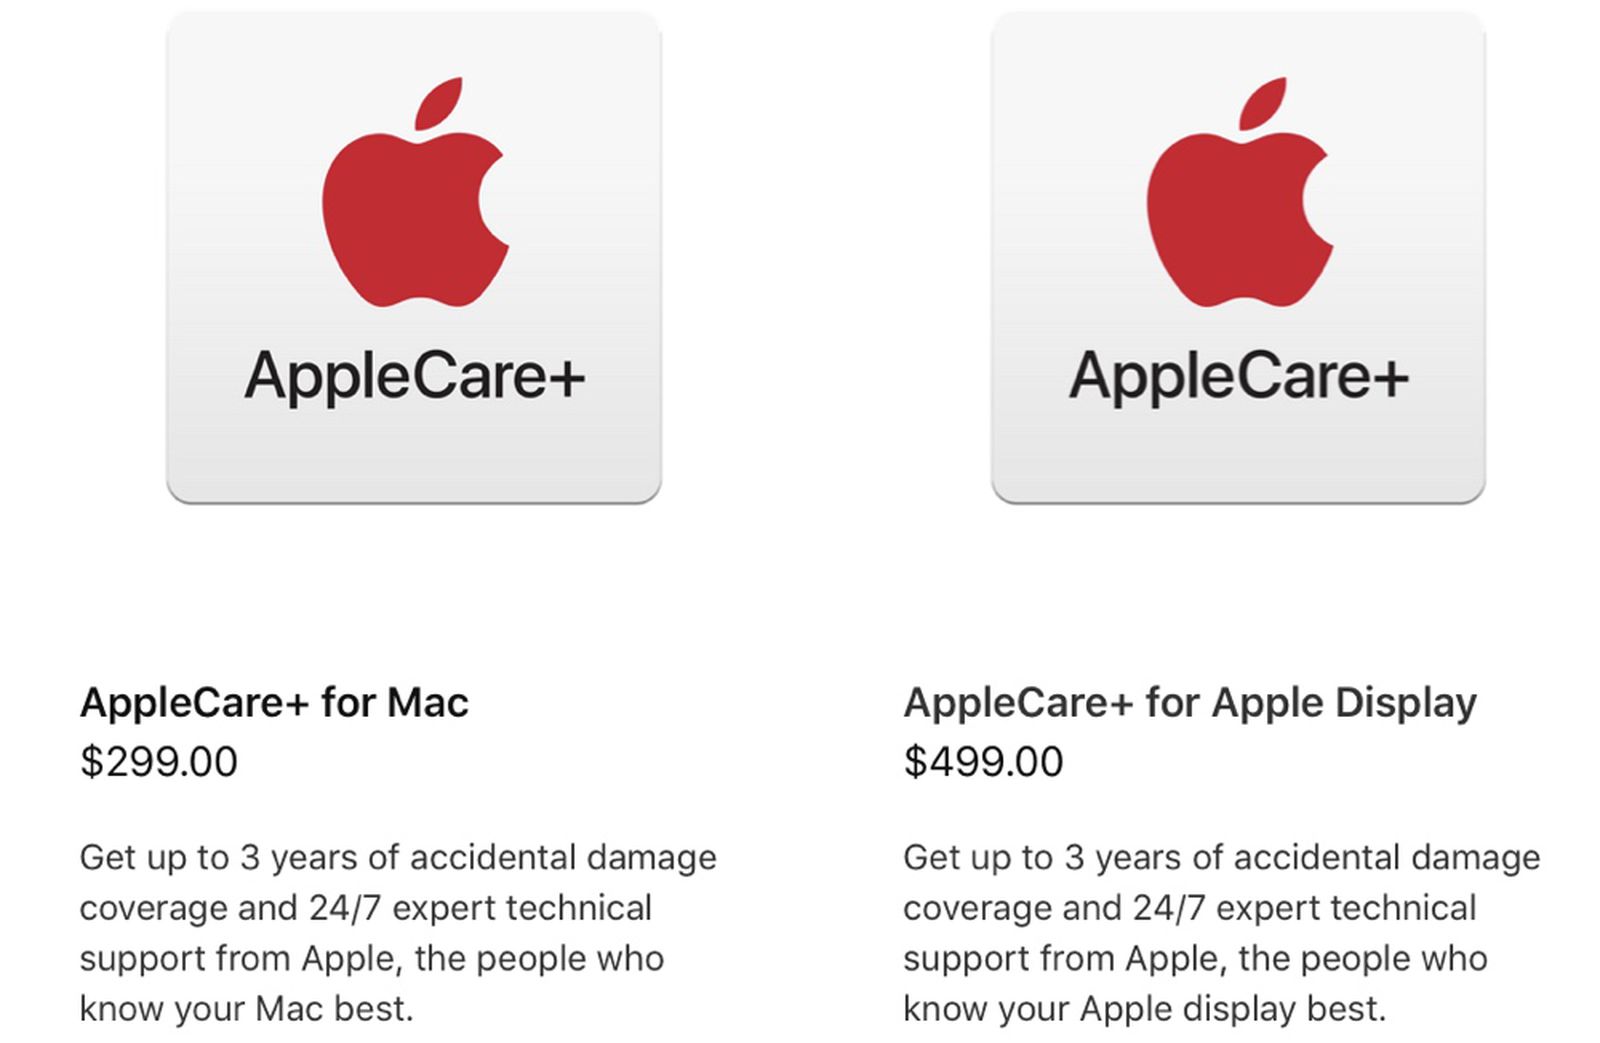 AppleCare+ for New Mac Pro Costs $299, AppleCare+ for Pro Display 